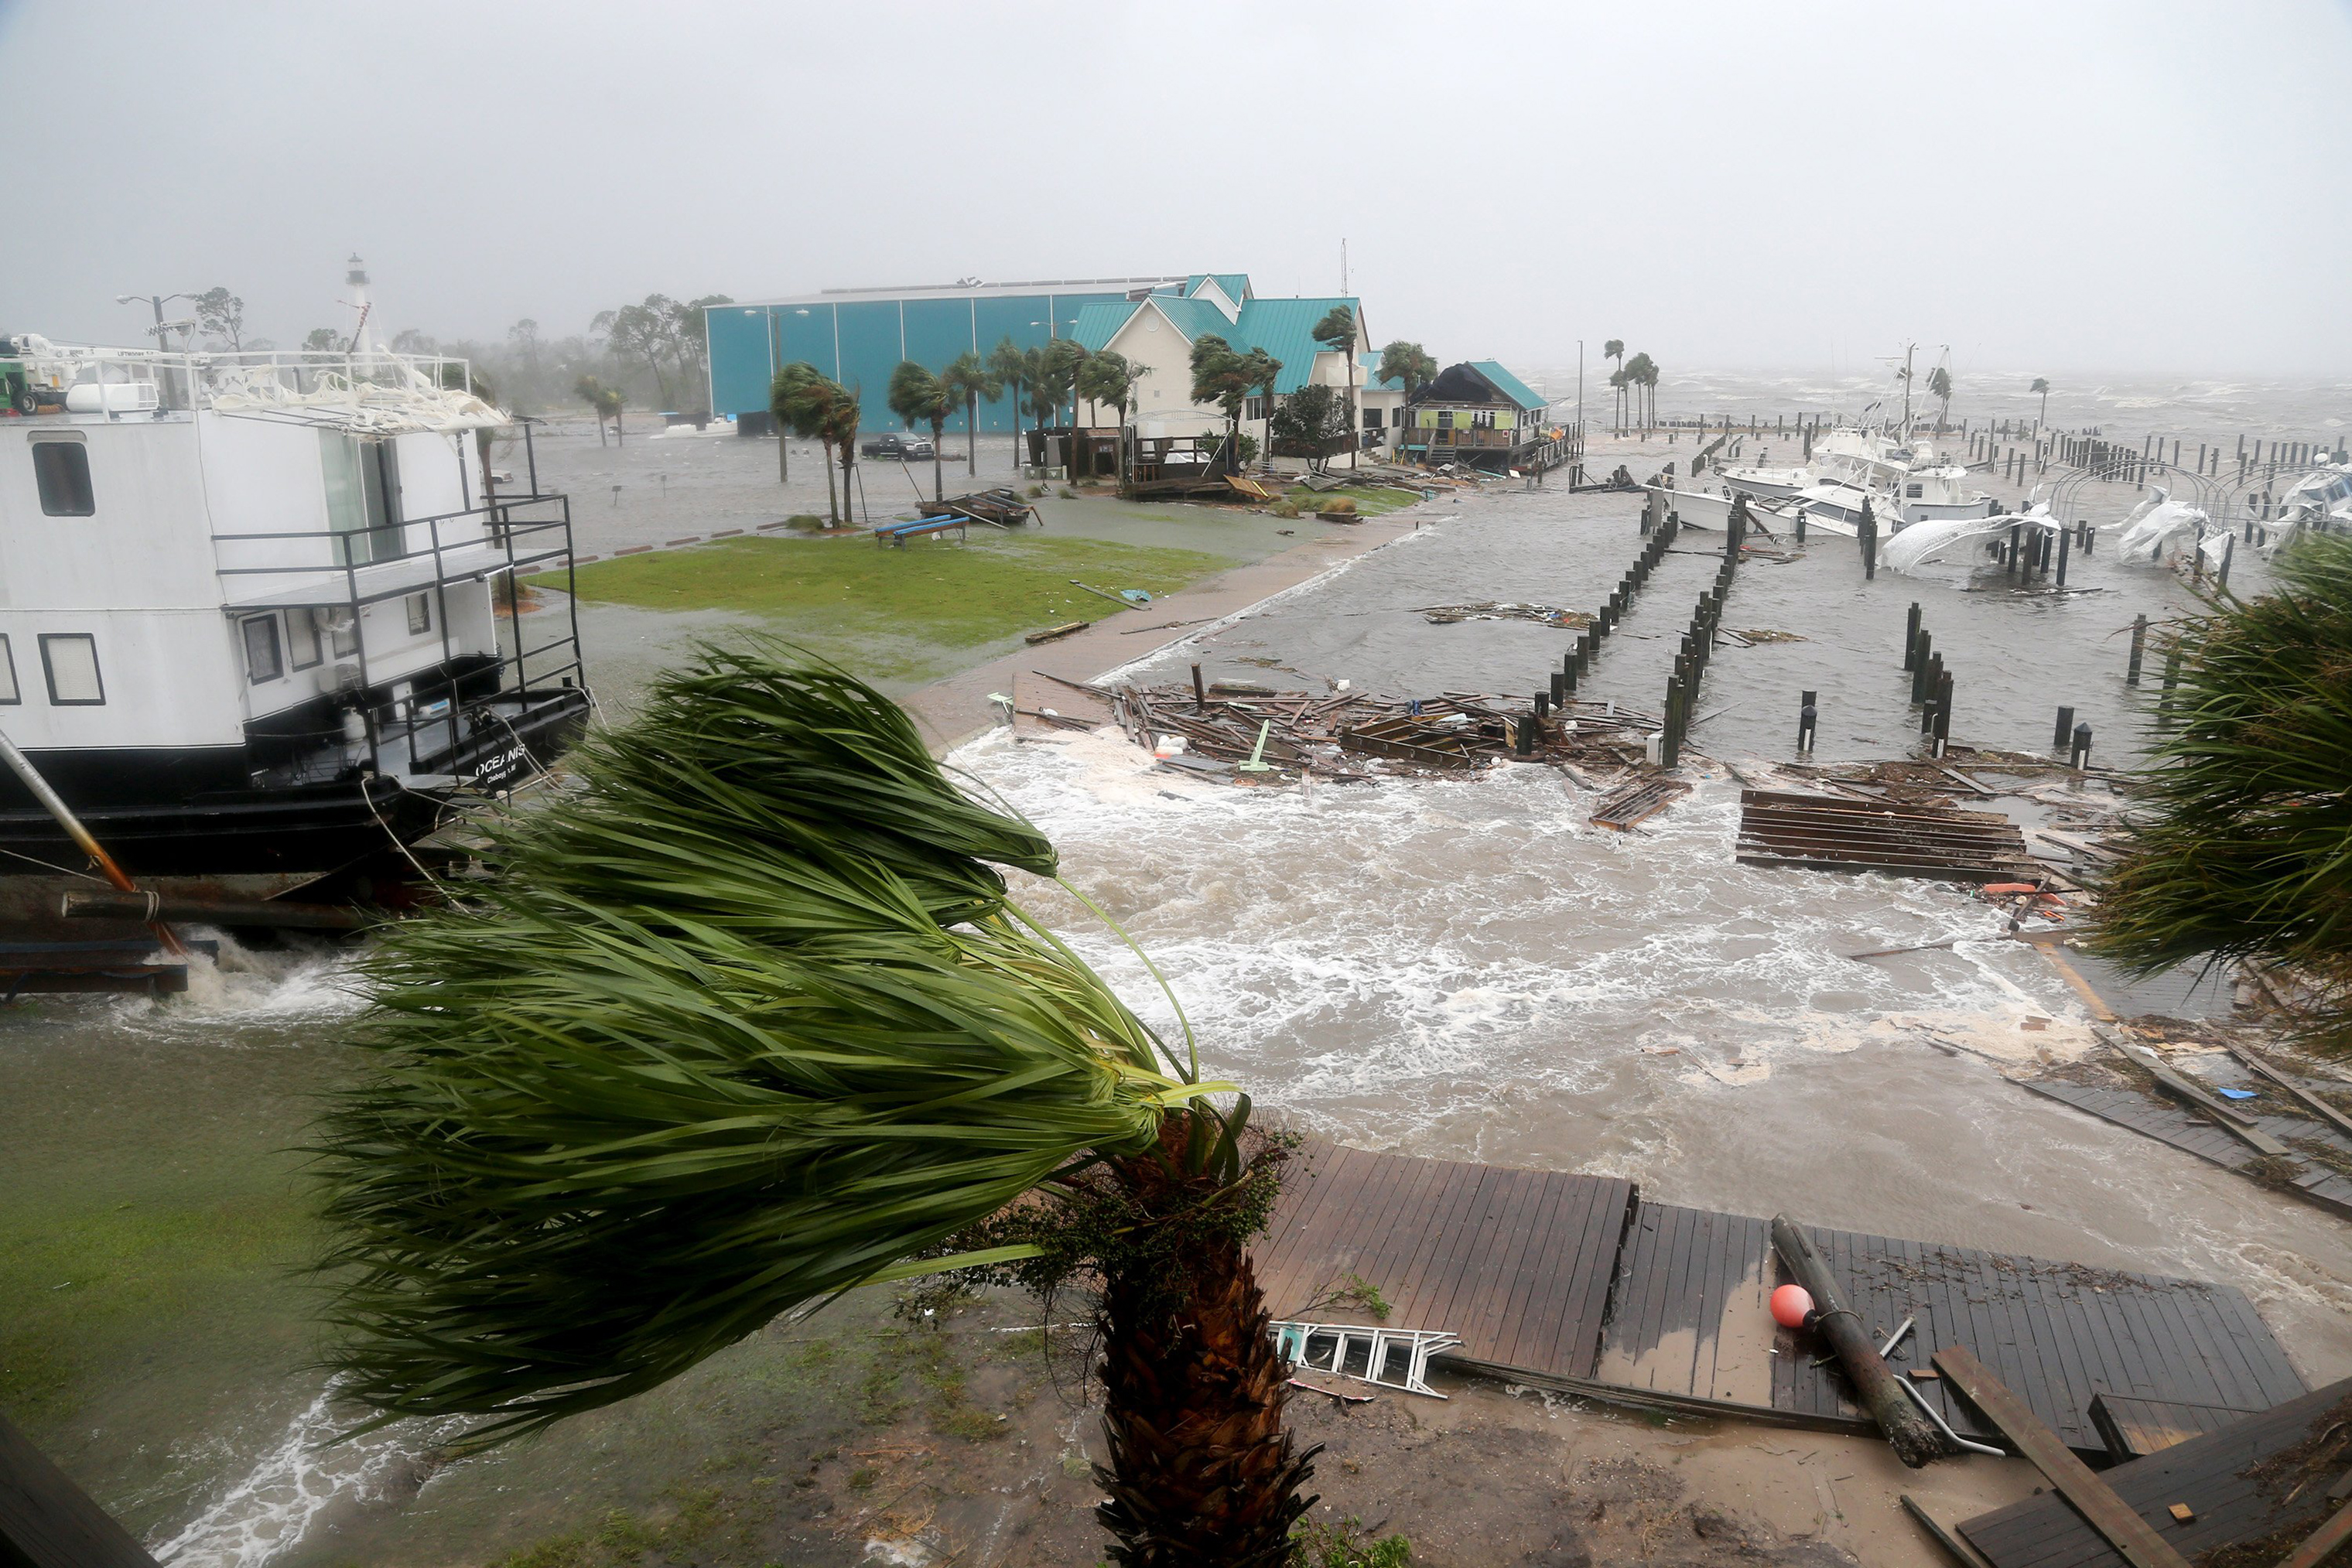 Boats lay sunk and damaged at the Port St. Joe Marina in the Florida Panhandle on Oct. 10 after Hurricane Michael made landfall near Mexico Beach. (Douglas R. Clifford—Tampa Bay Times/ZUMA Wire)